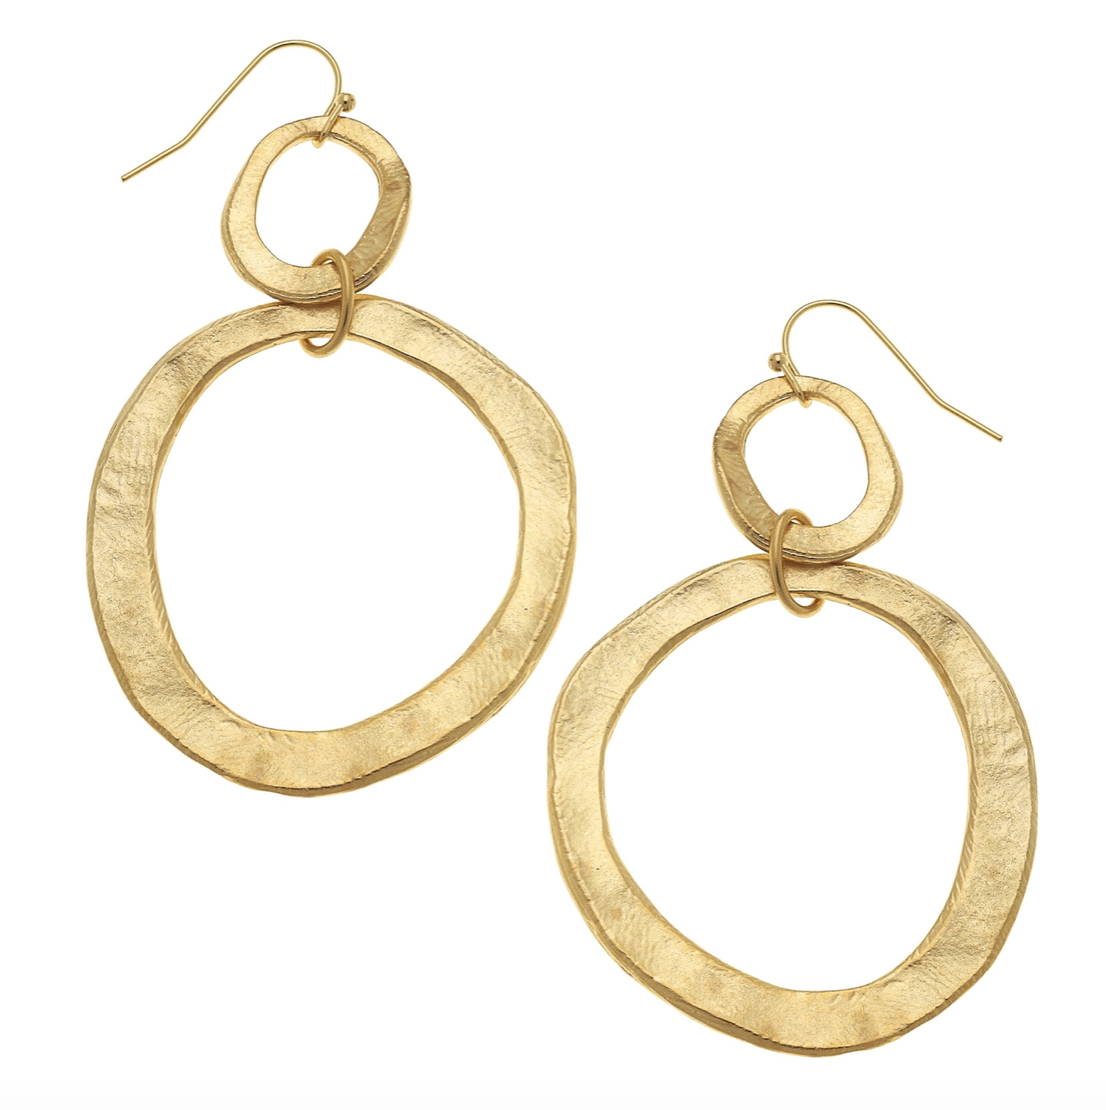 Double Hoop Earrings by Susan Shaw - Corinne Boutique Family Owned and Operated USA